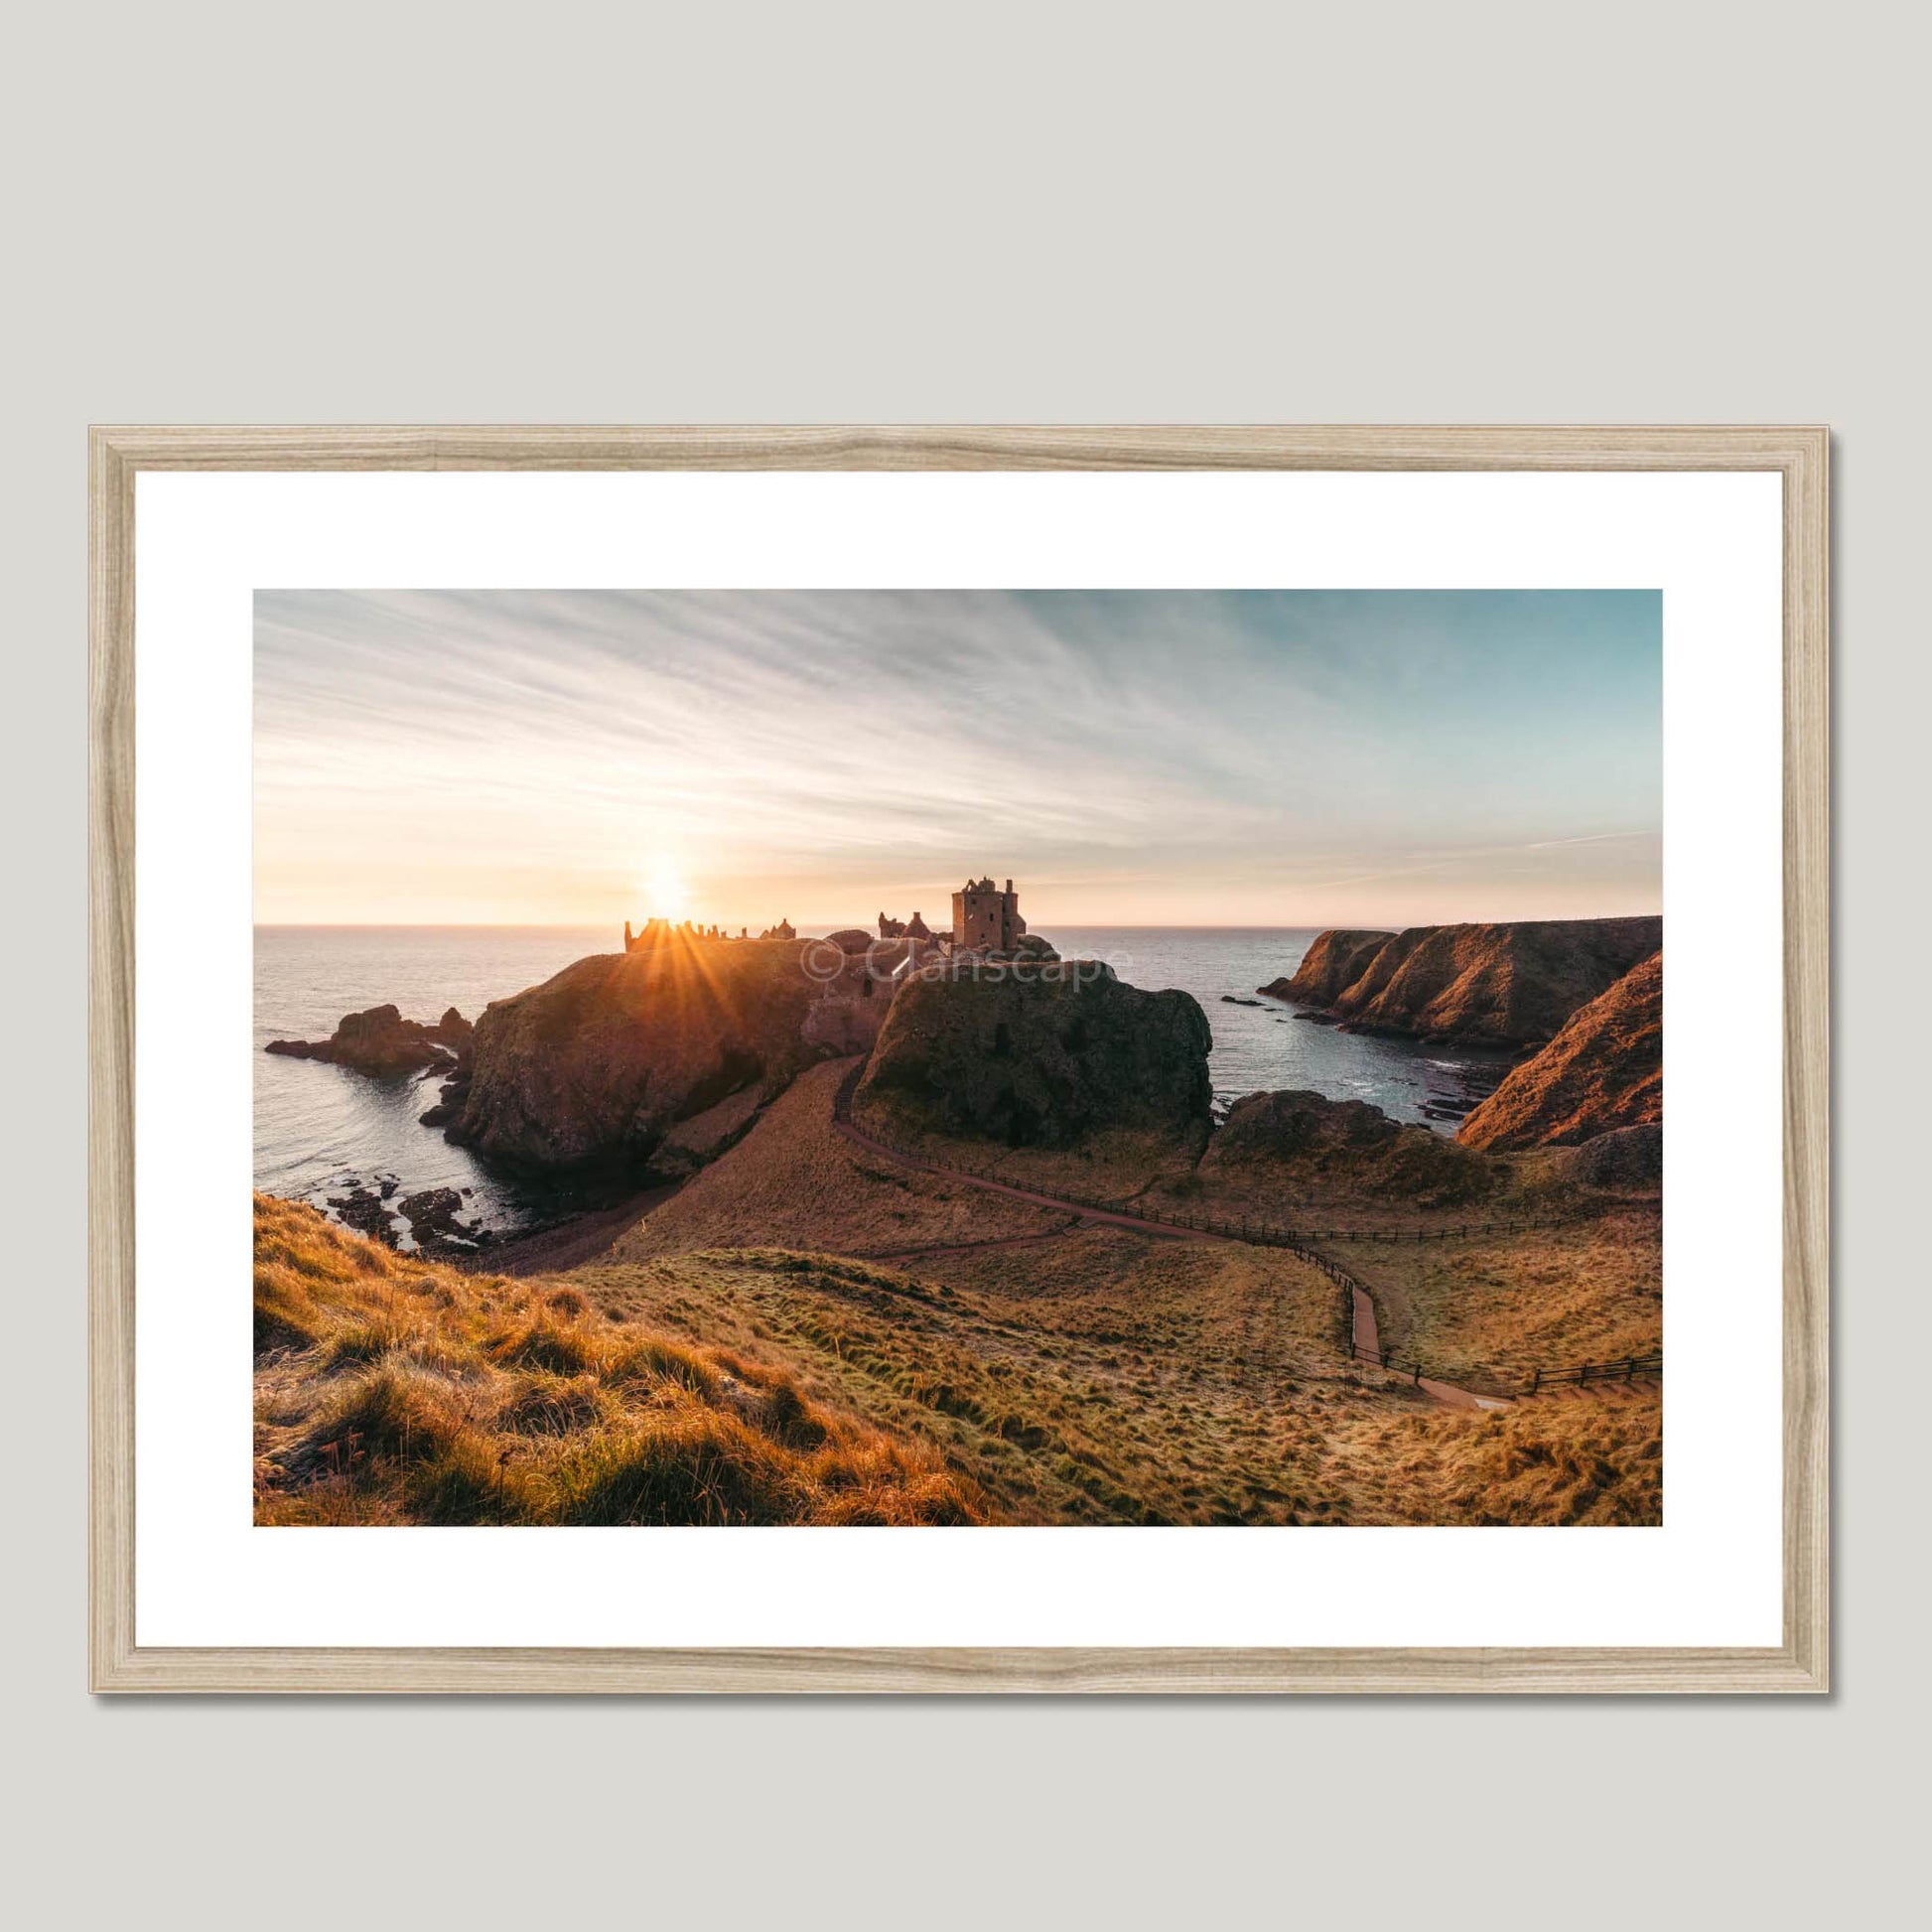 Clan Keith - Dunnotter Castle - Framed & Mounted Photo Print 28"x20" Natural